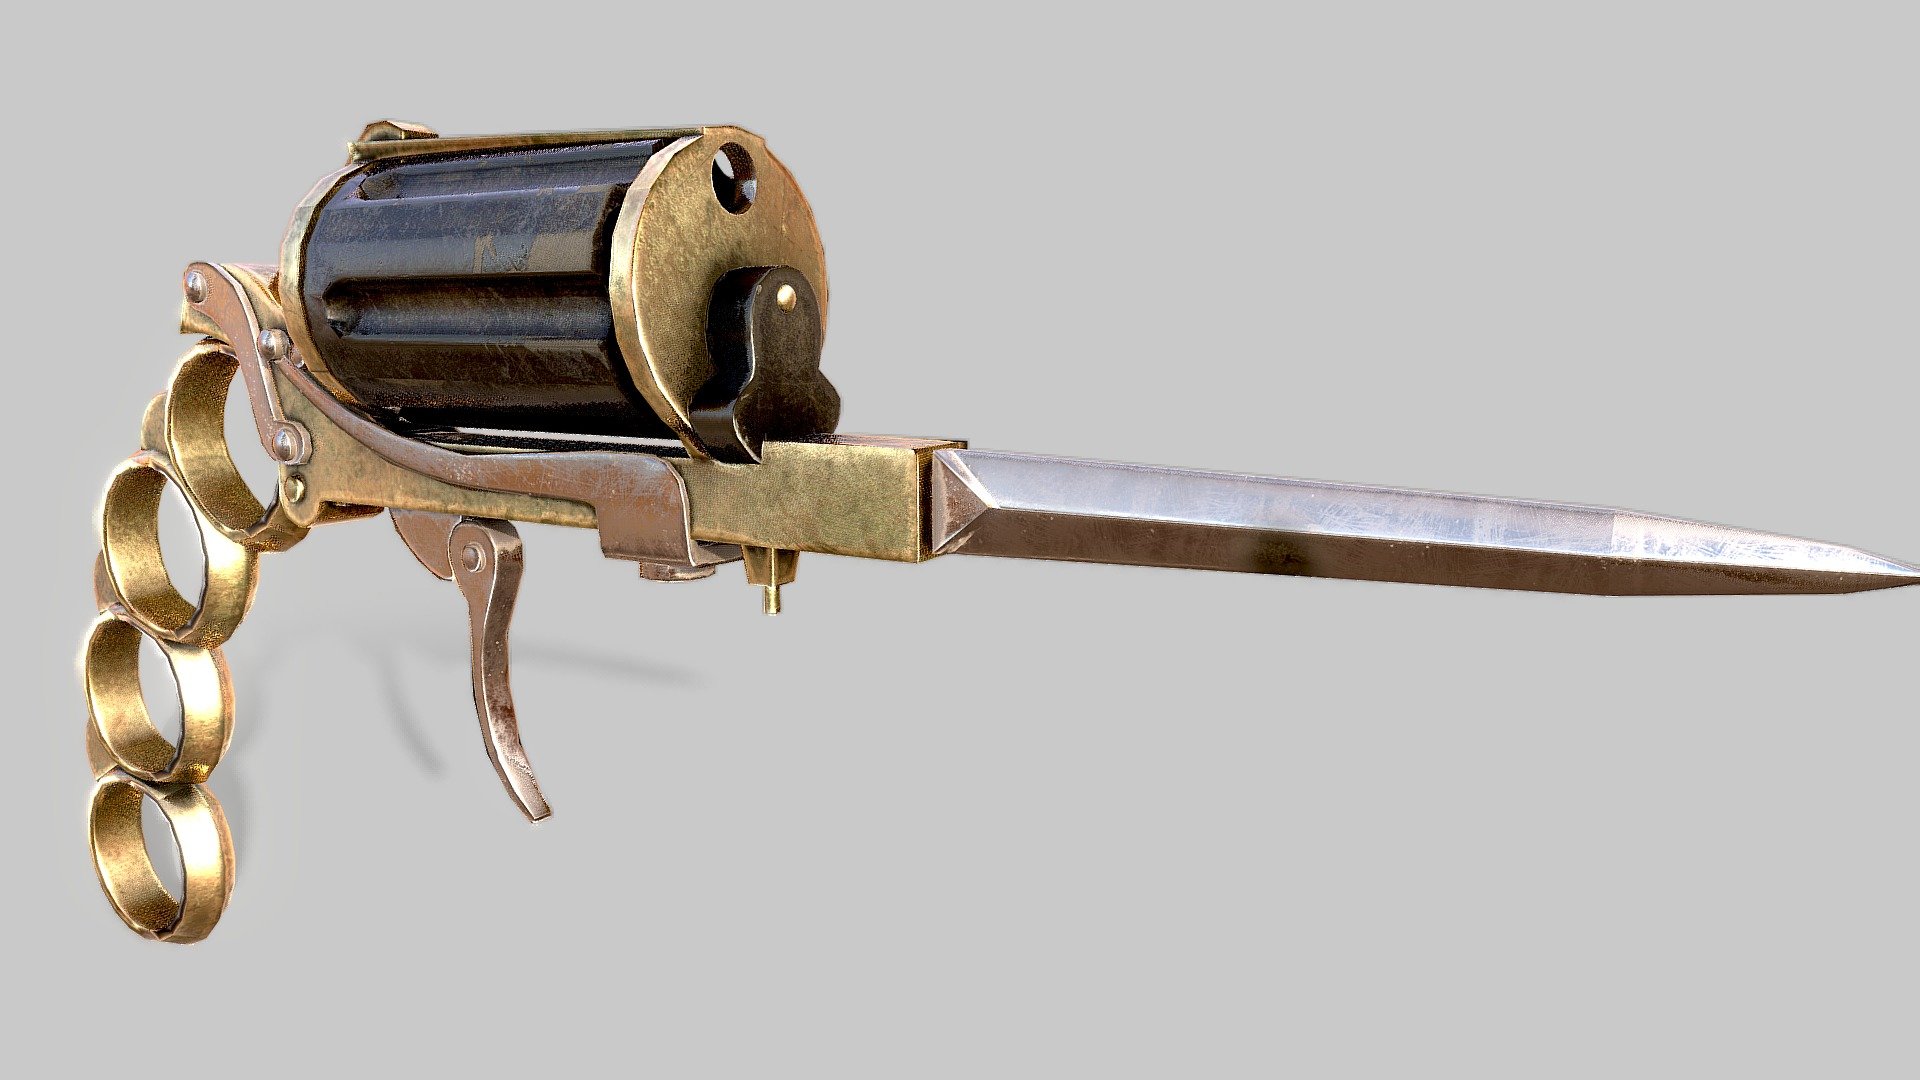 Prompted by the lovely staff here at Sketchfab, I have decided to research a bit more about the pistol this model is based on, and boy was it a fun read!

Fun Fact: It costs over 3000$ today

The design dates from the 1860s, and is attributed to Louis Dolne. The gun was manufactured until the end of the 1800s.

One of the rarest gambler/hide away/ personal defense deringers around. Incorporates a 6mm (22) rimfire revolver, &ldquo;knuckles